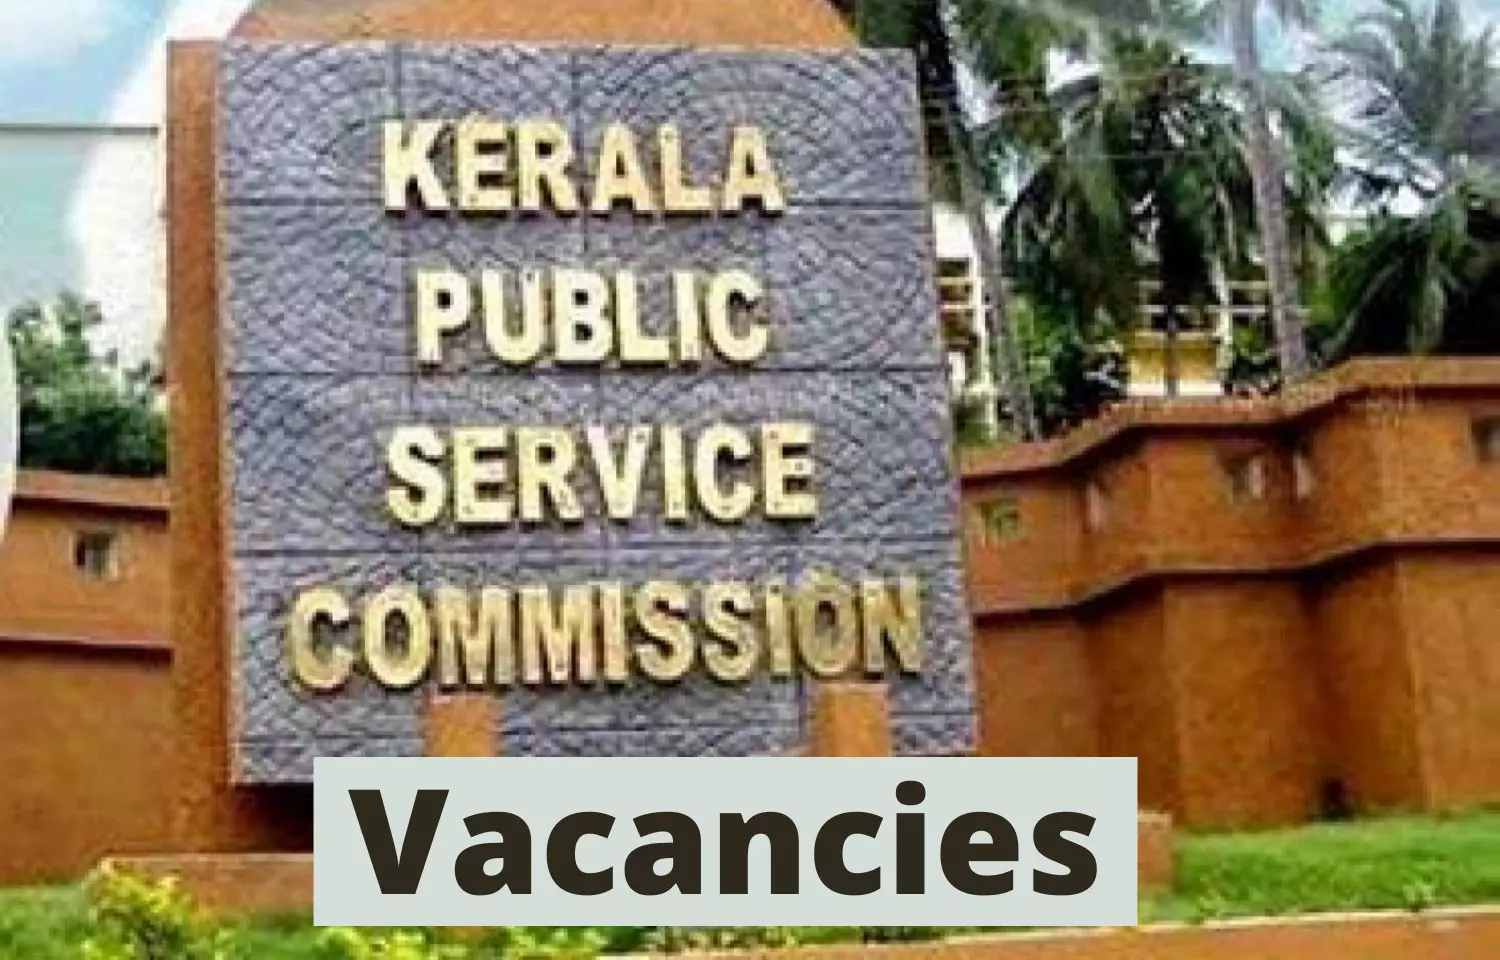 Apply Now At Kerala Public Service Commission for Assistant Professor Post in General Surgery Dept, Details